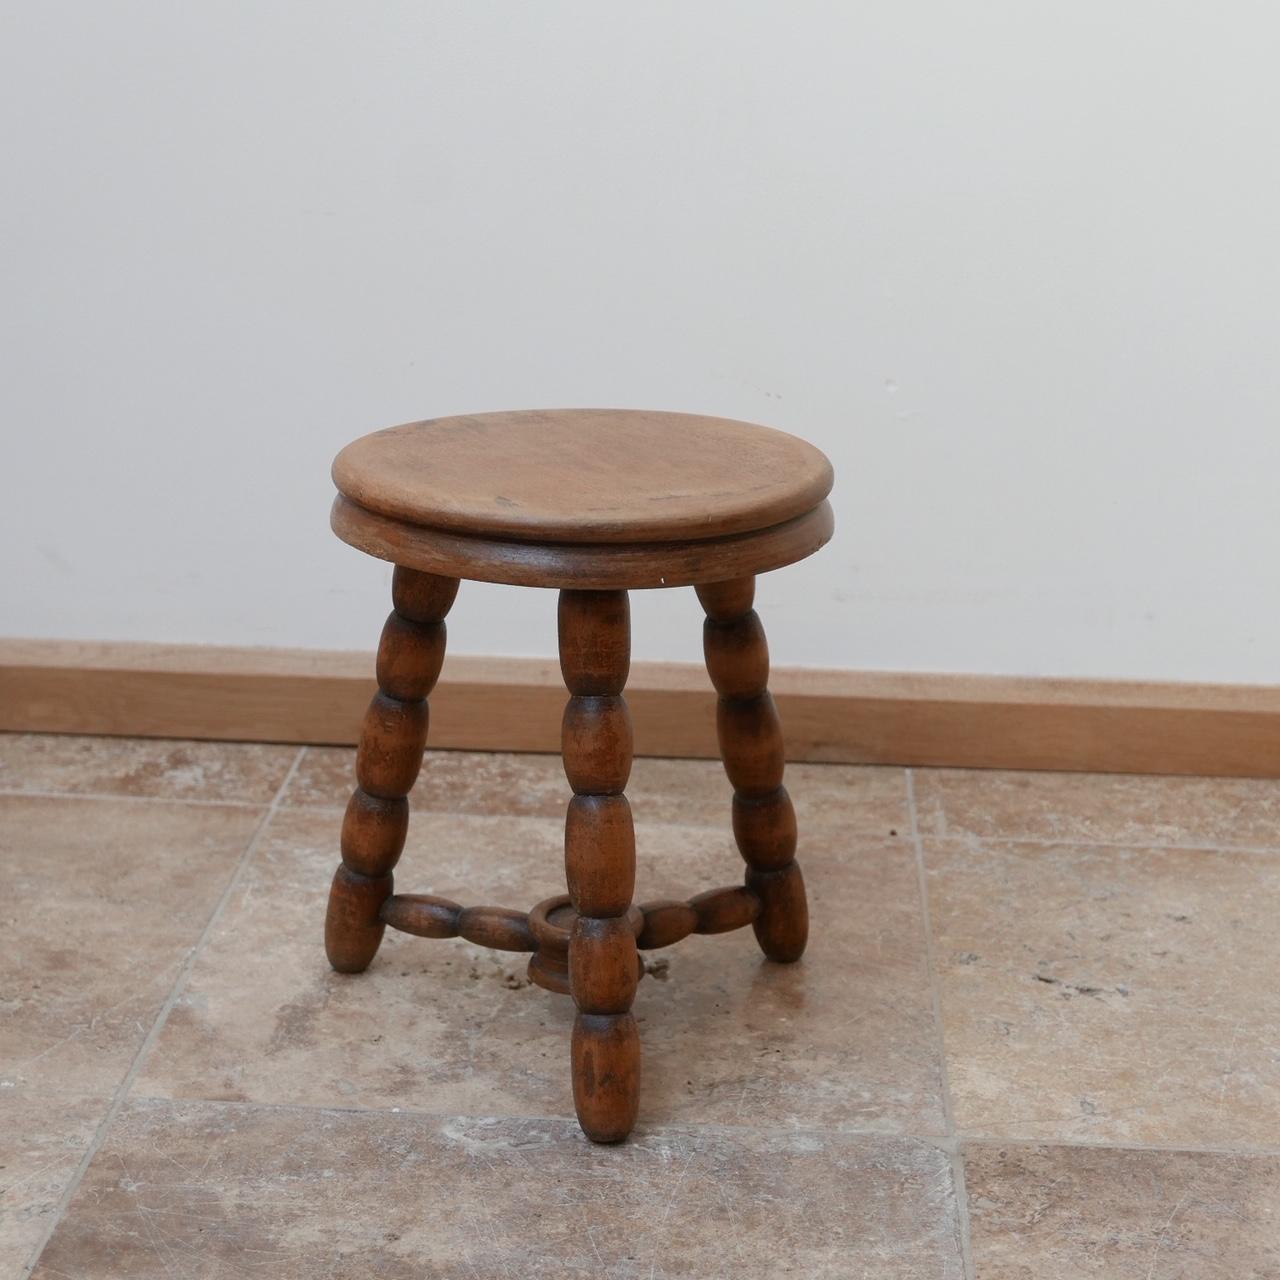 Mid-20th Century English Midcentury Low Bobbin Stool or Side Table